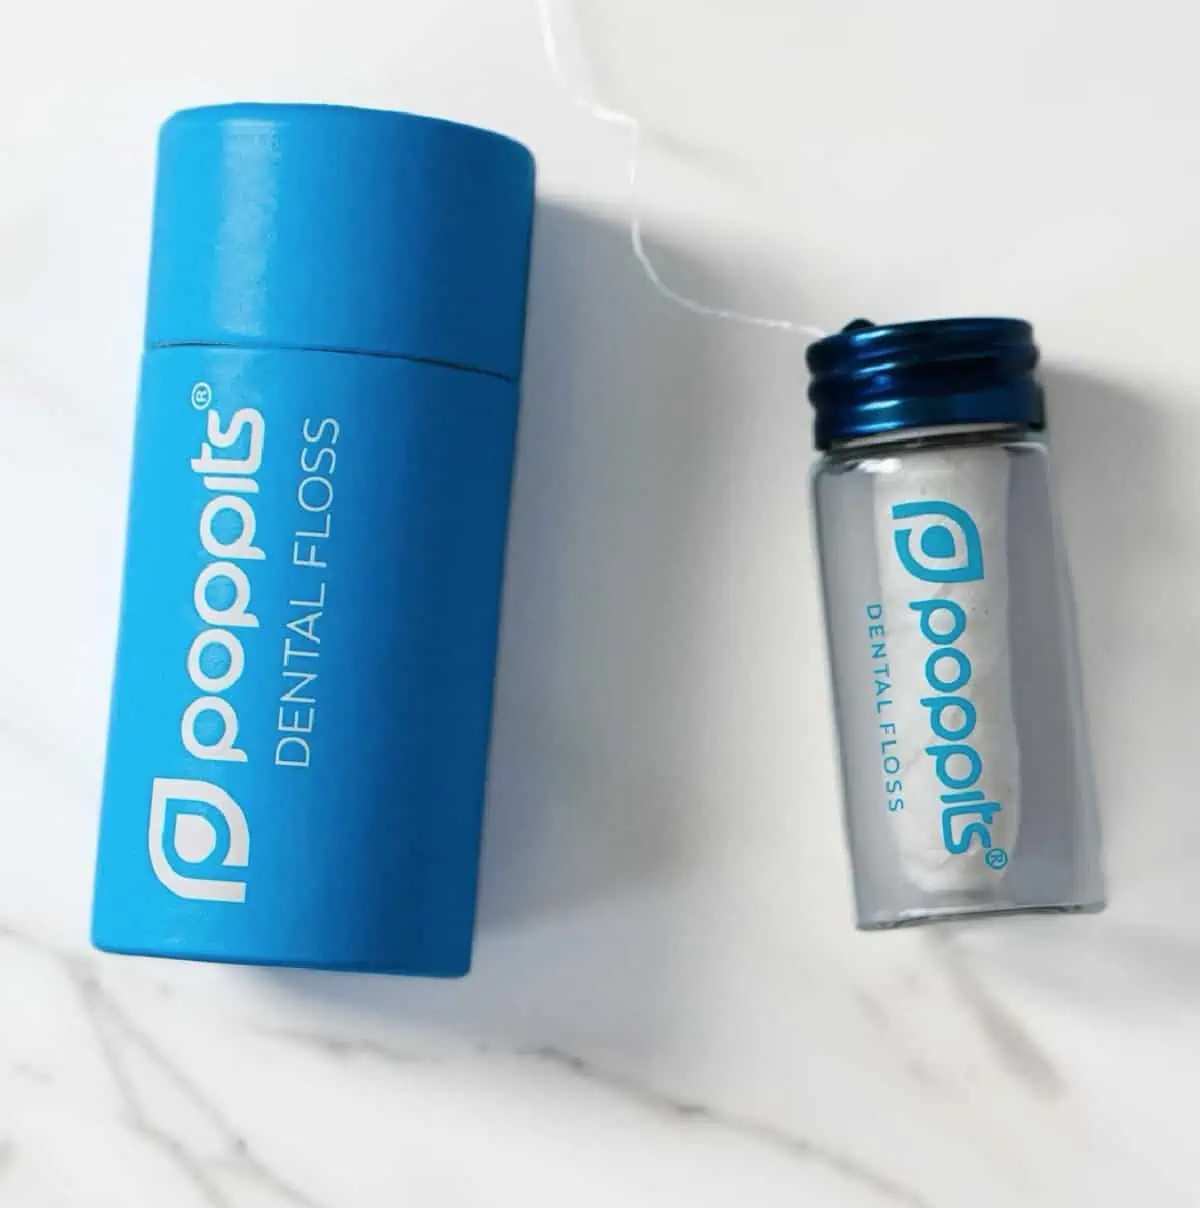 Blue cardboard container and glass floss container for Vegan Poppits Floss on a white marble background.